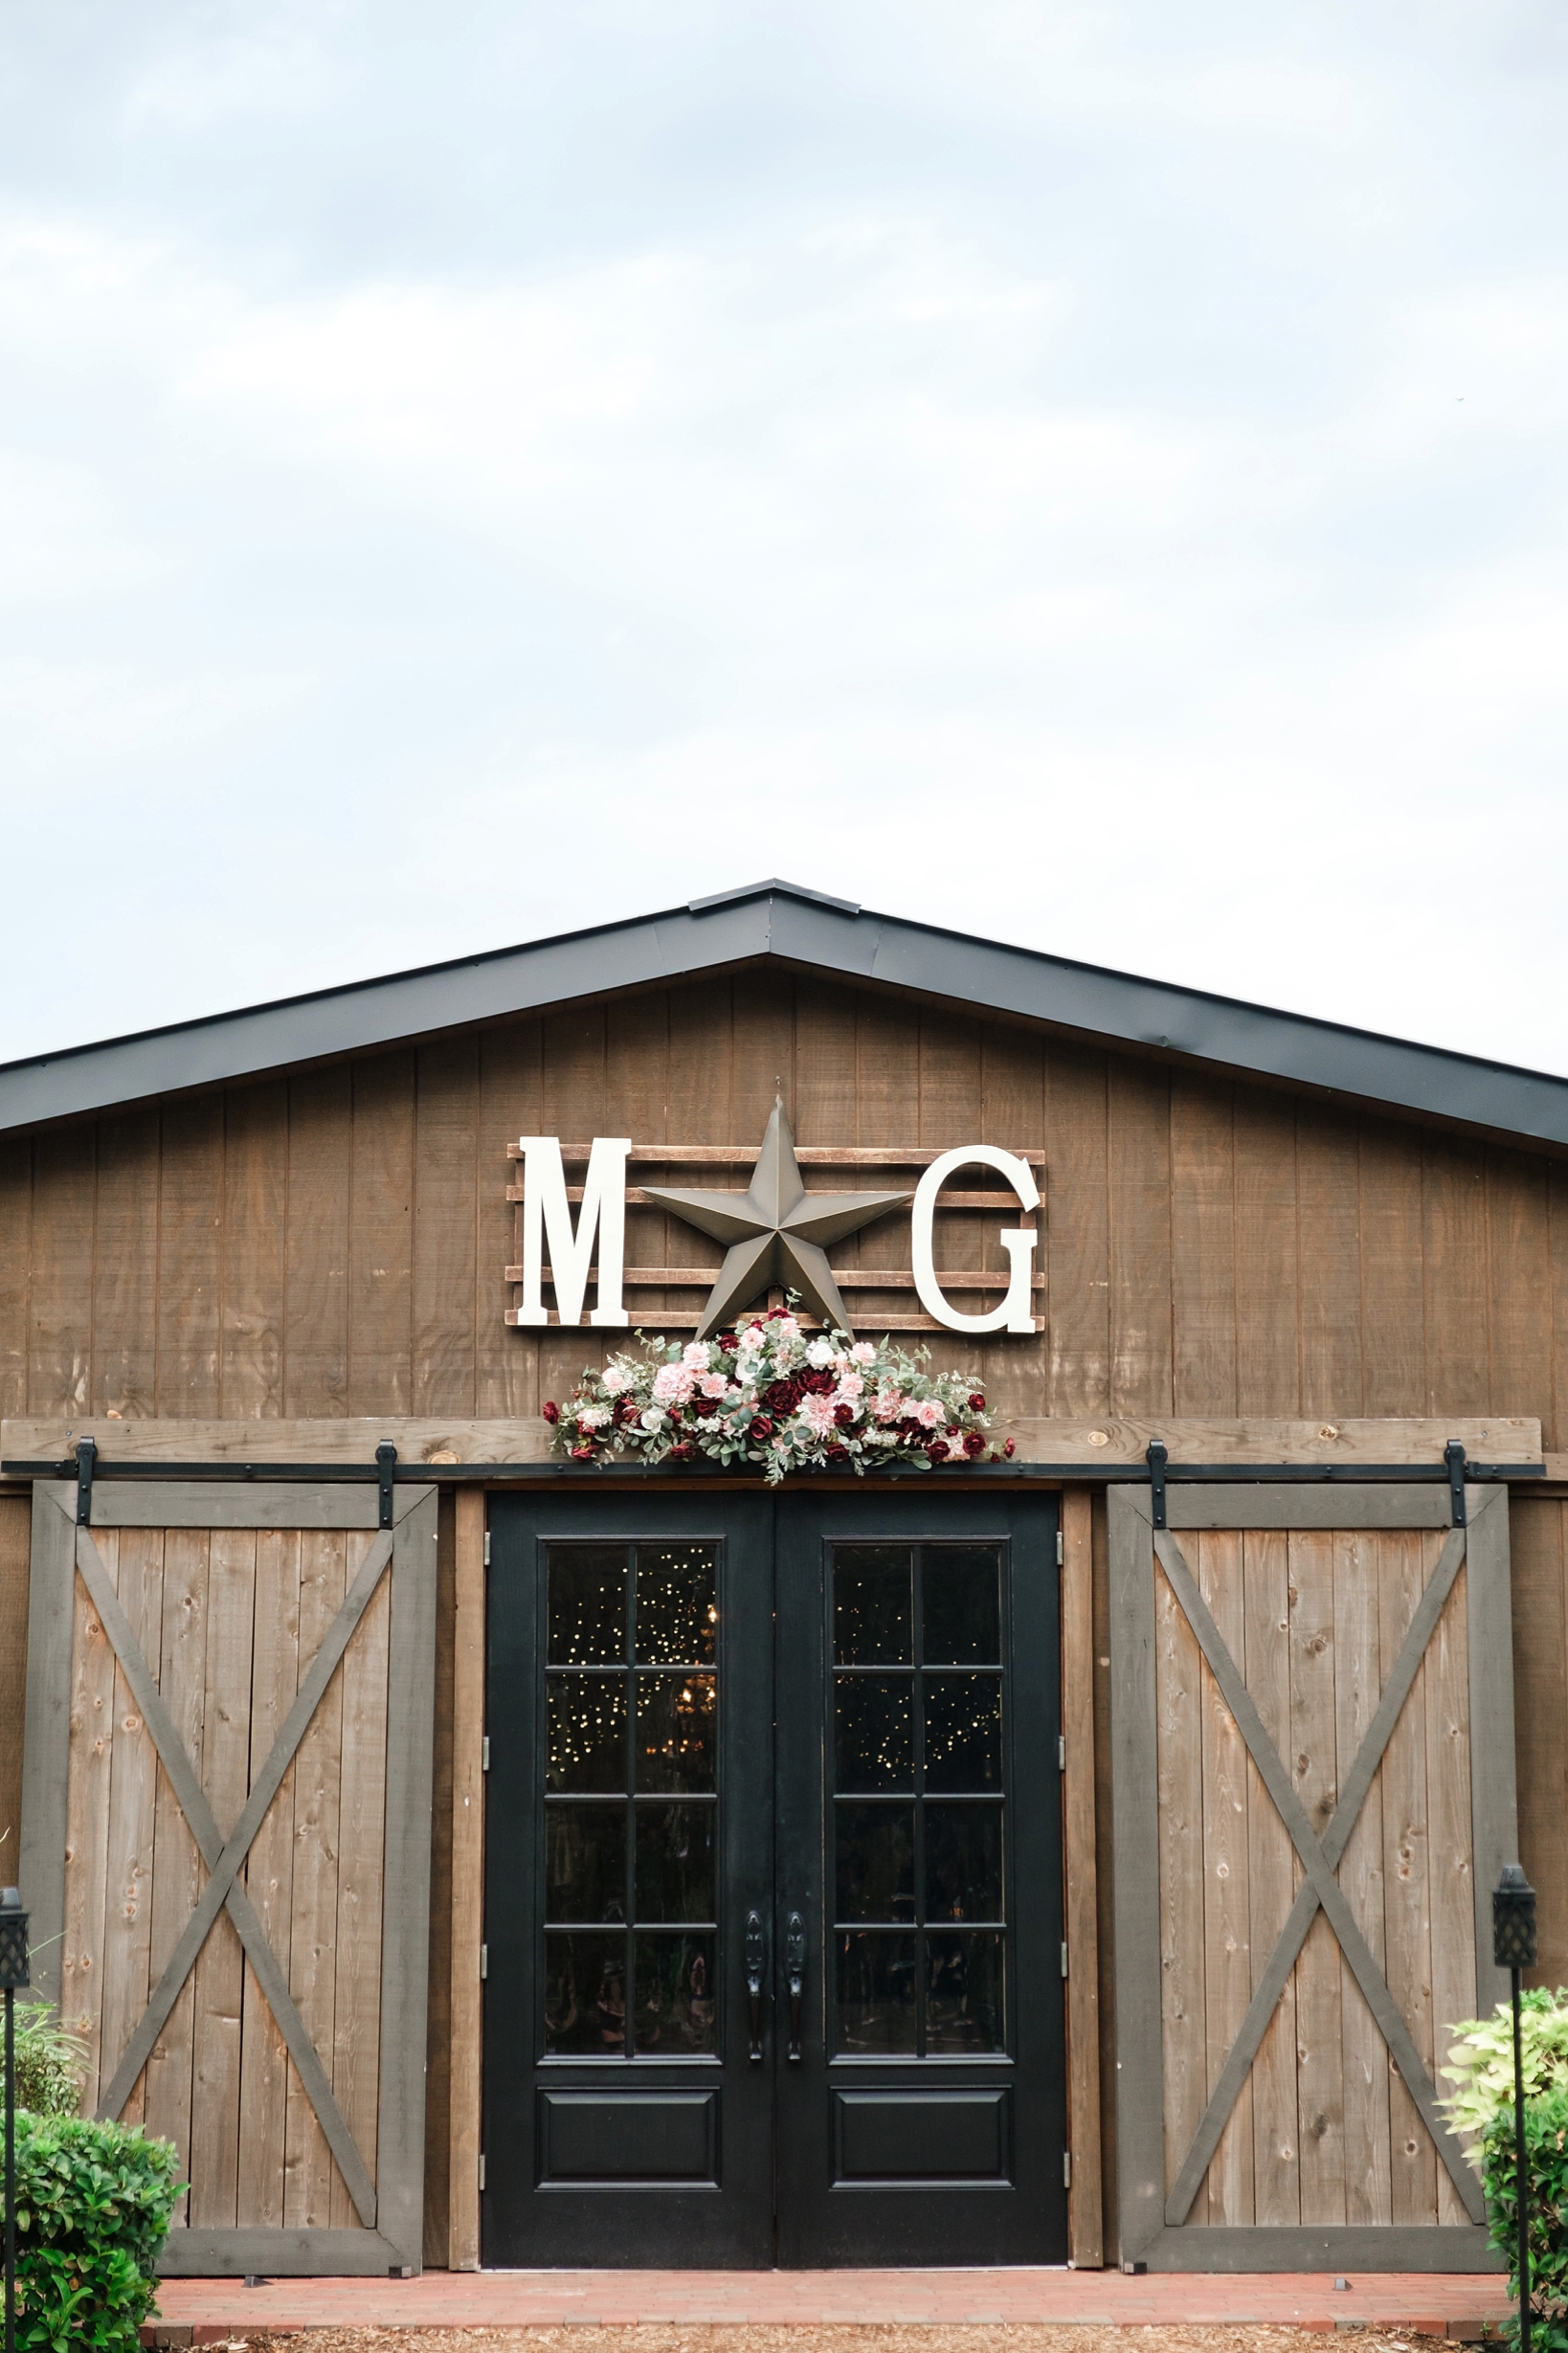 Reception barn at cross creek ranch with Bride and Groom's initials over the doors